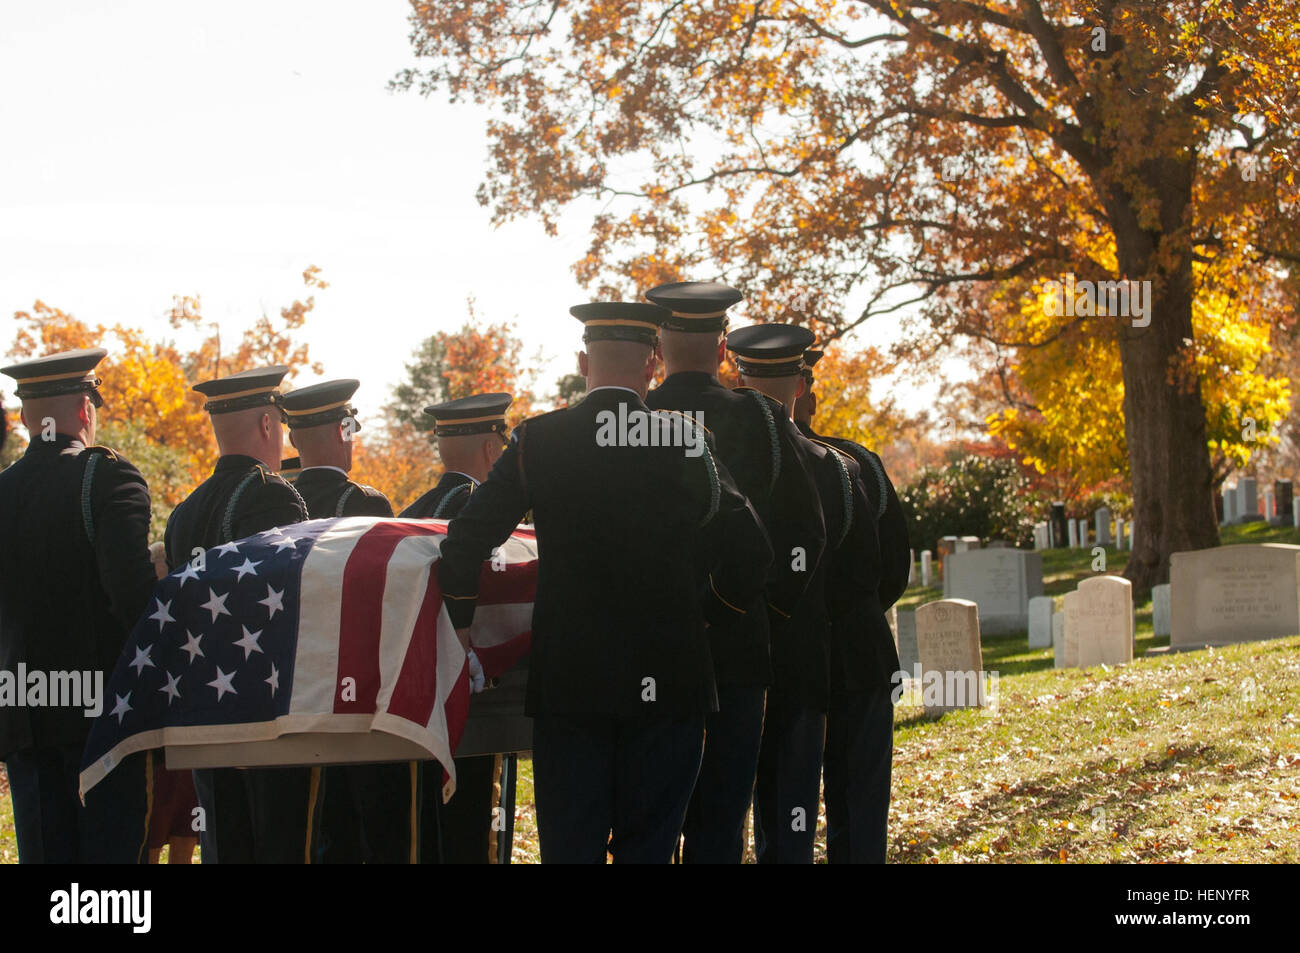 Retired Maj. Gen. Lee E. Surut is laid to rest by soldiers of the 3rd U.S. Infantry Regiment (The Old Guard), Nov. 12, 2014, in Arlington, Va. The two-star general had served for 40 years in the Untied States Army and is survived by his wife, three grown children, six grandchildren, and one great-grandchild. (U.S. Army Photo by Spc. Cody W. Torkelson) Final respects to retired Maj. Gen. Lee E. Surut Nov. 12, 2014 141112-A-FT656-578 Stock Photo